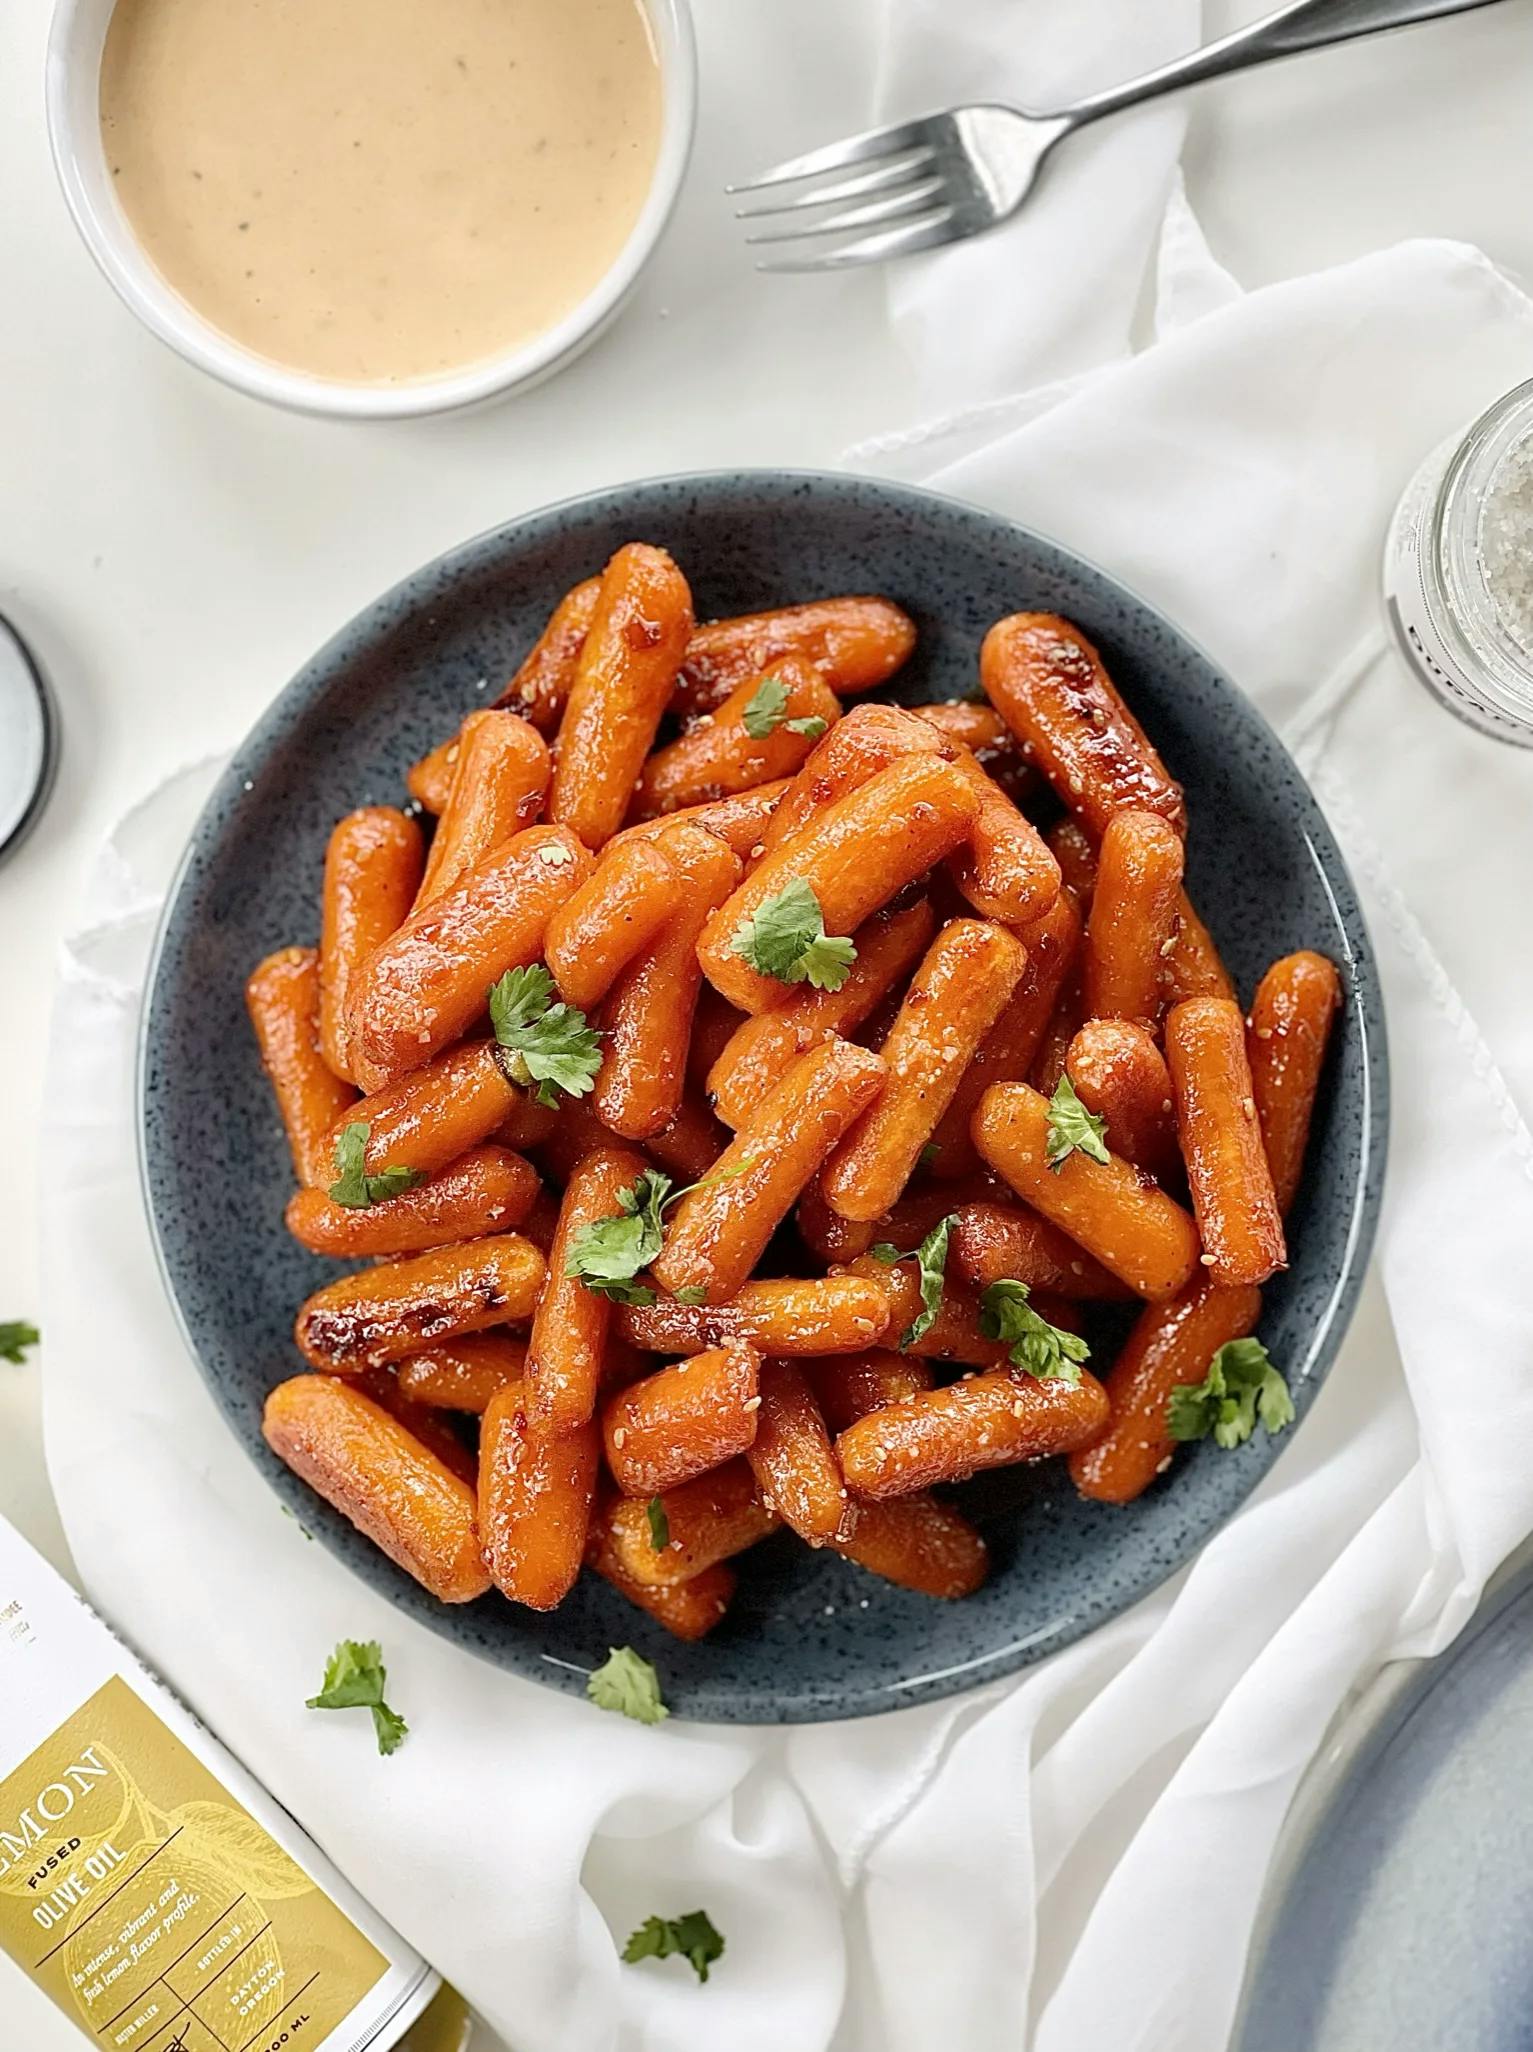 Picture for Honey-Glazed Oven Baked Baby Carrots